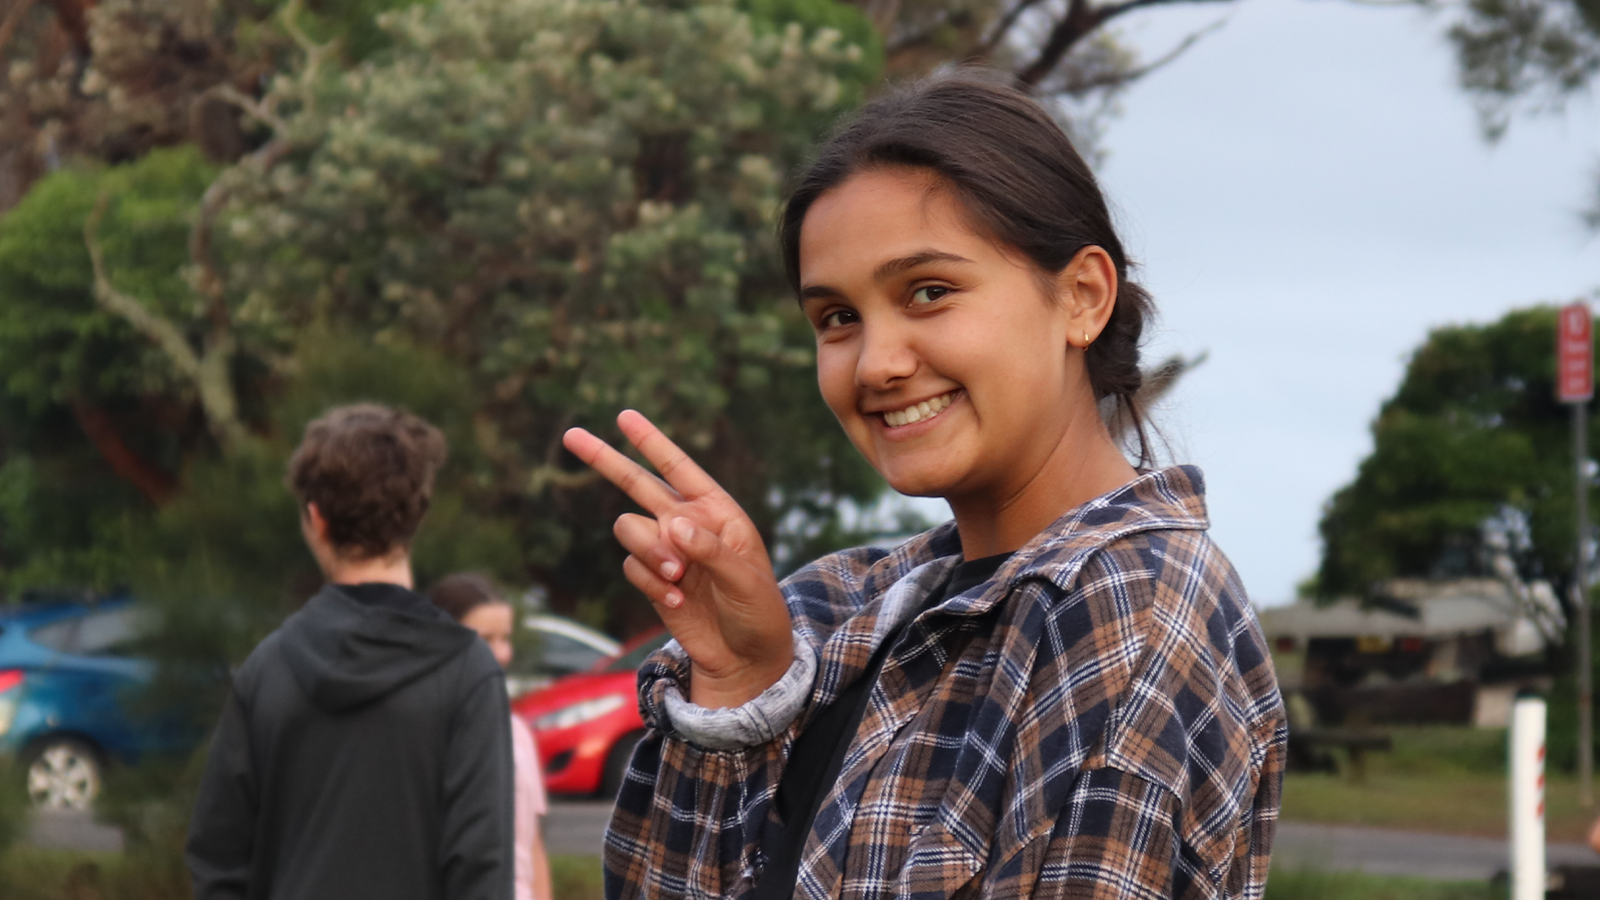 A young adult volunteer smiling outside and holding up a peace sign with two fingers